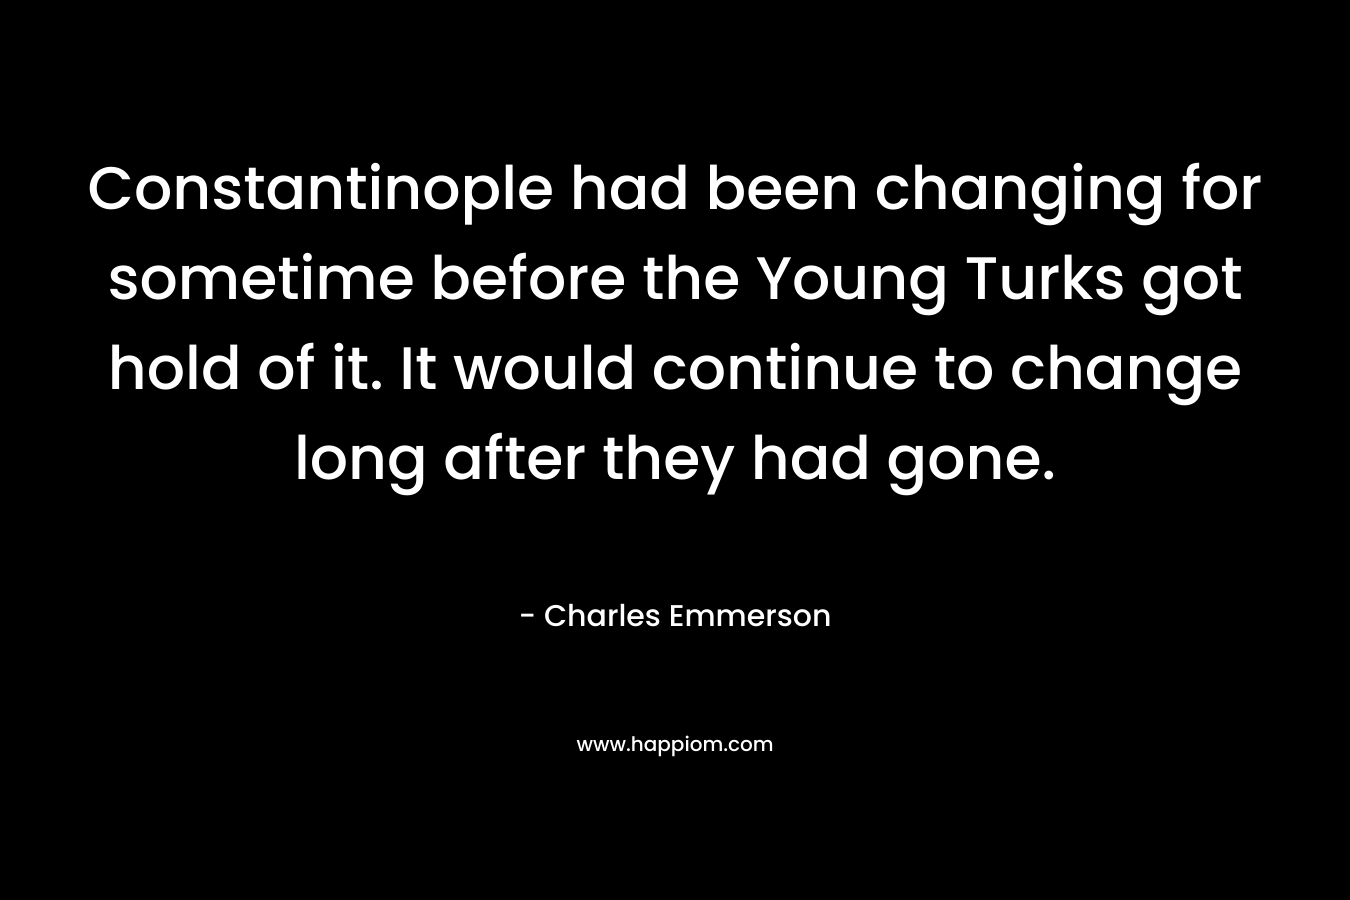 Constantinople had been changing for sometime before the Young Turks got hold of it. It would continue to change long after they had gone. – Charles Emmerson